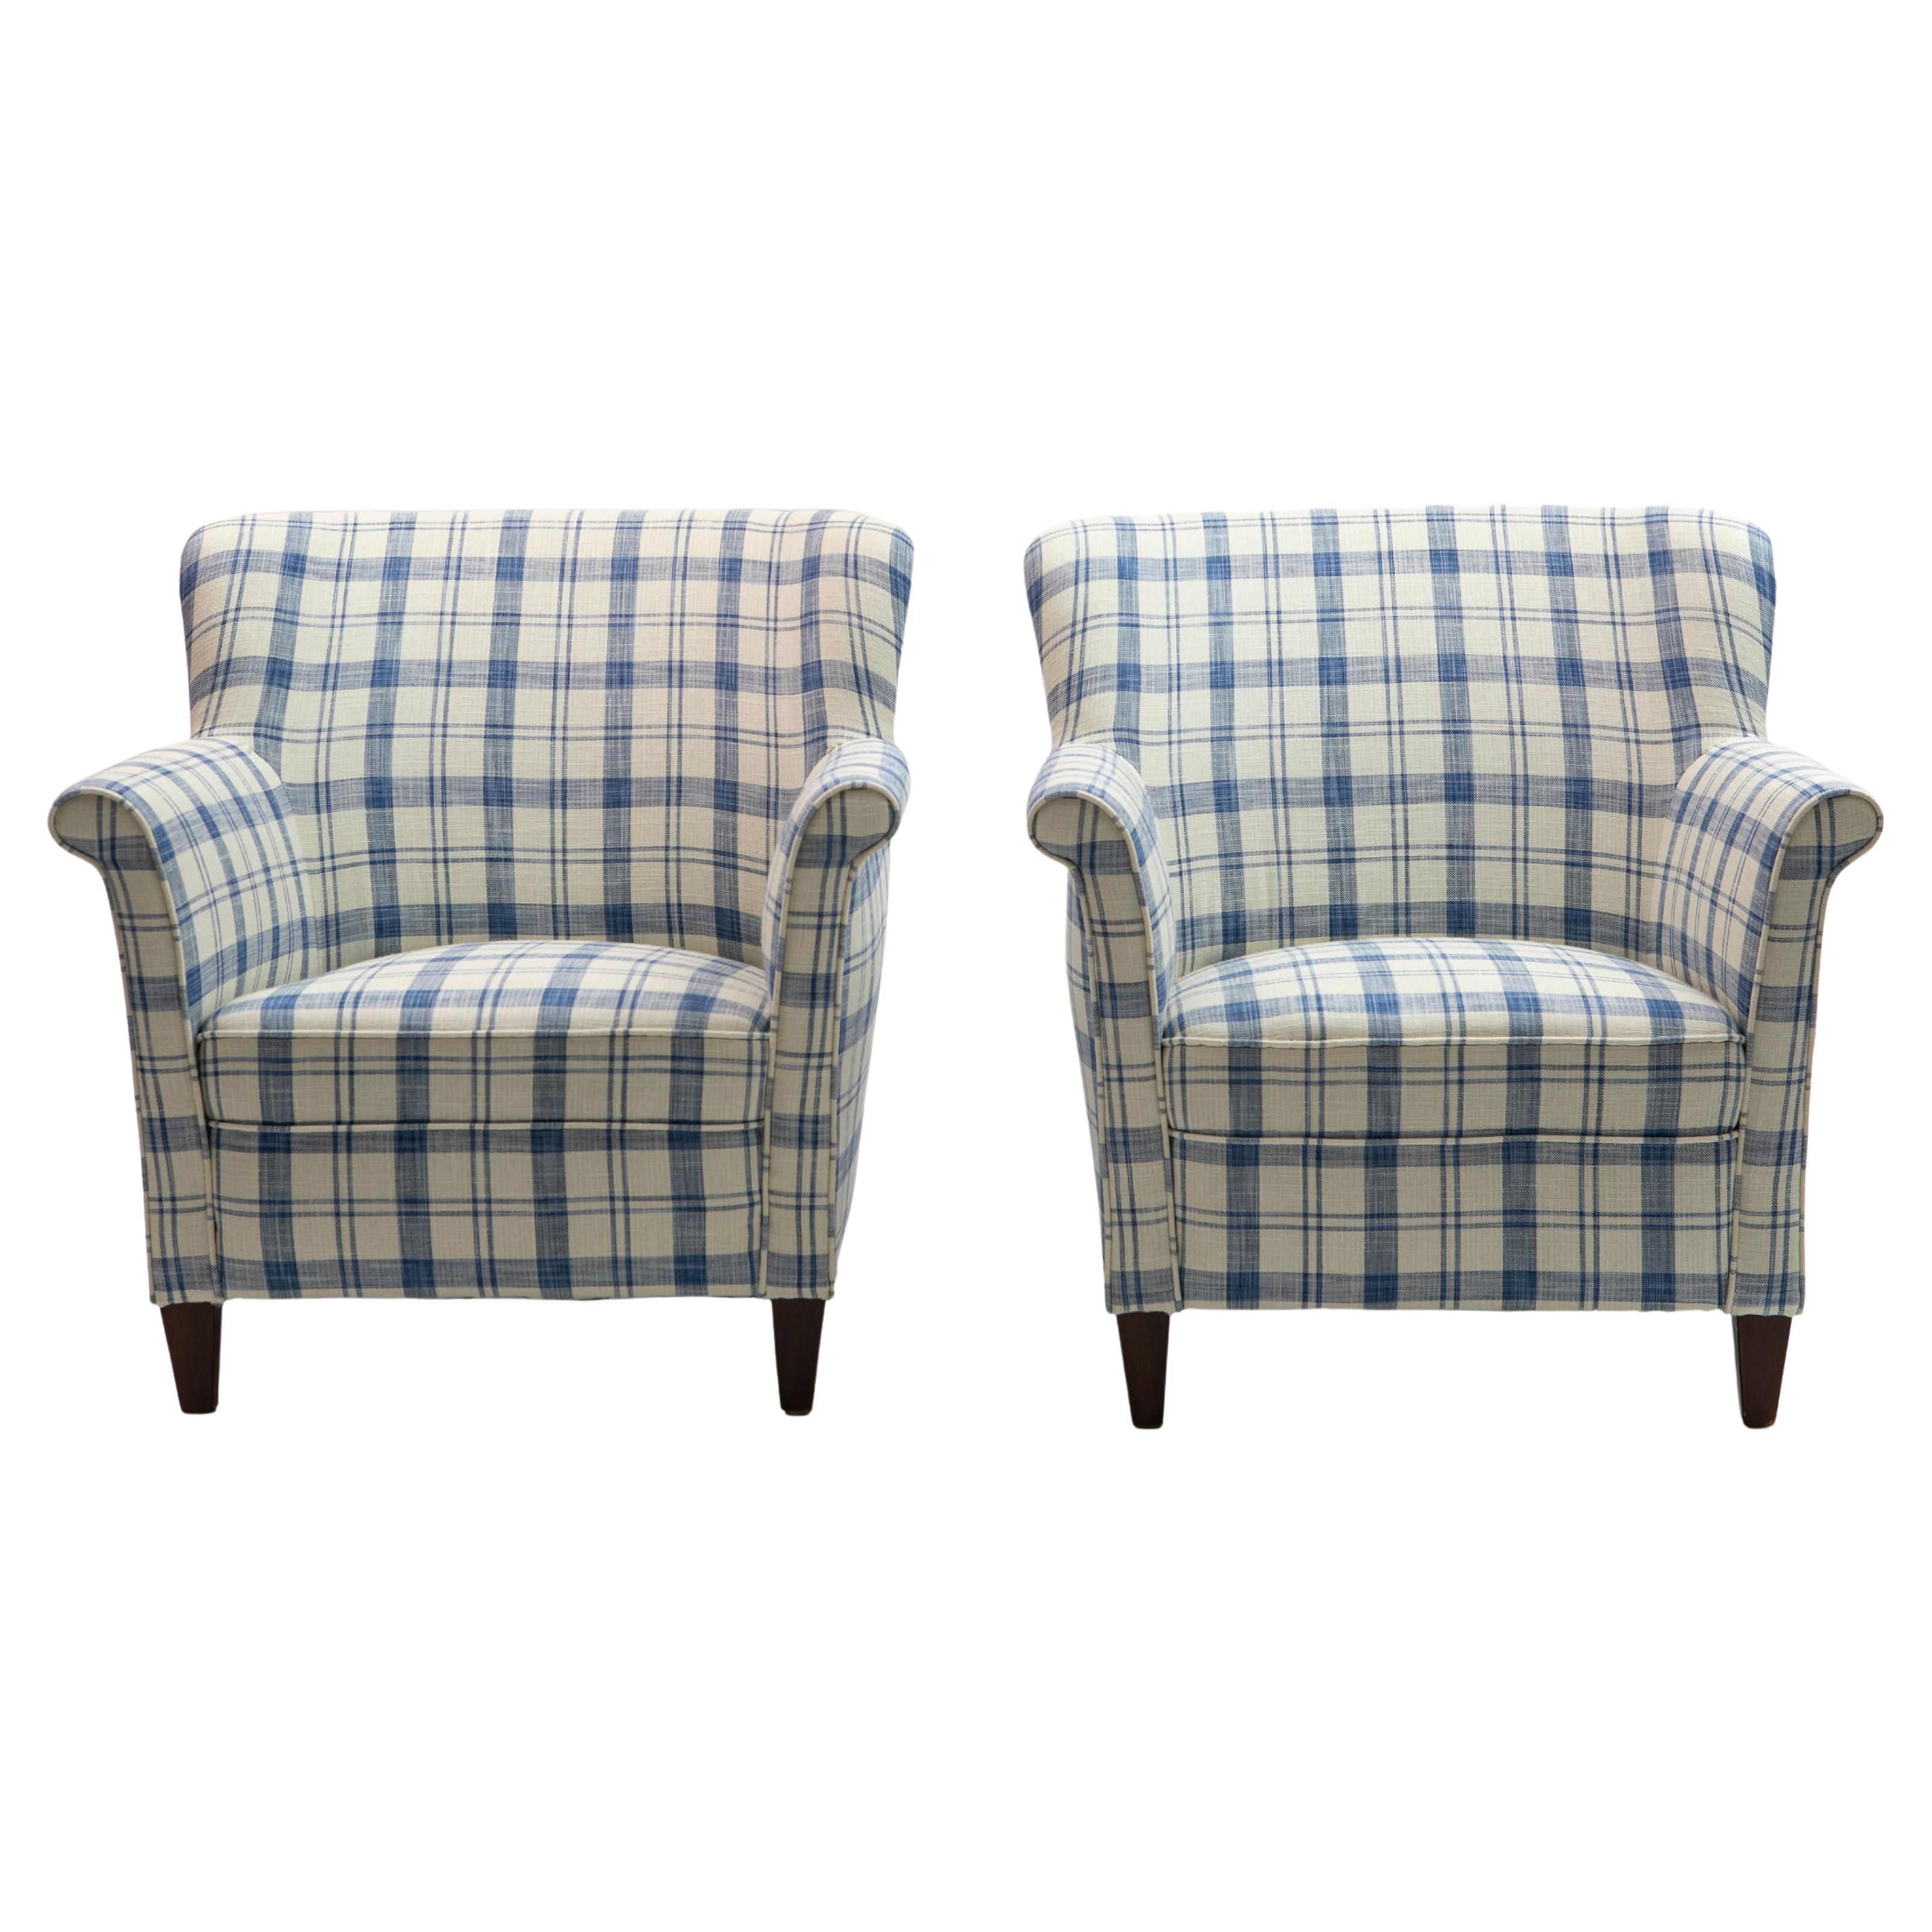 Pair of Danish easy chairs circa 1950.
Newly upholstered in a blue and white check pattern linen blend fabric from 